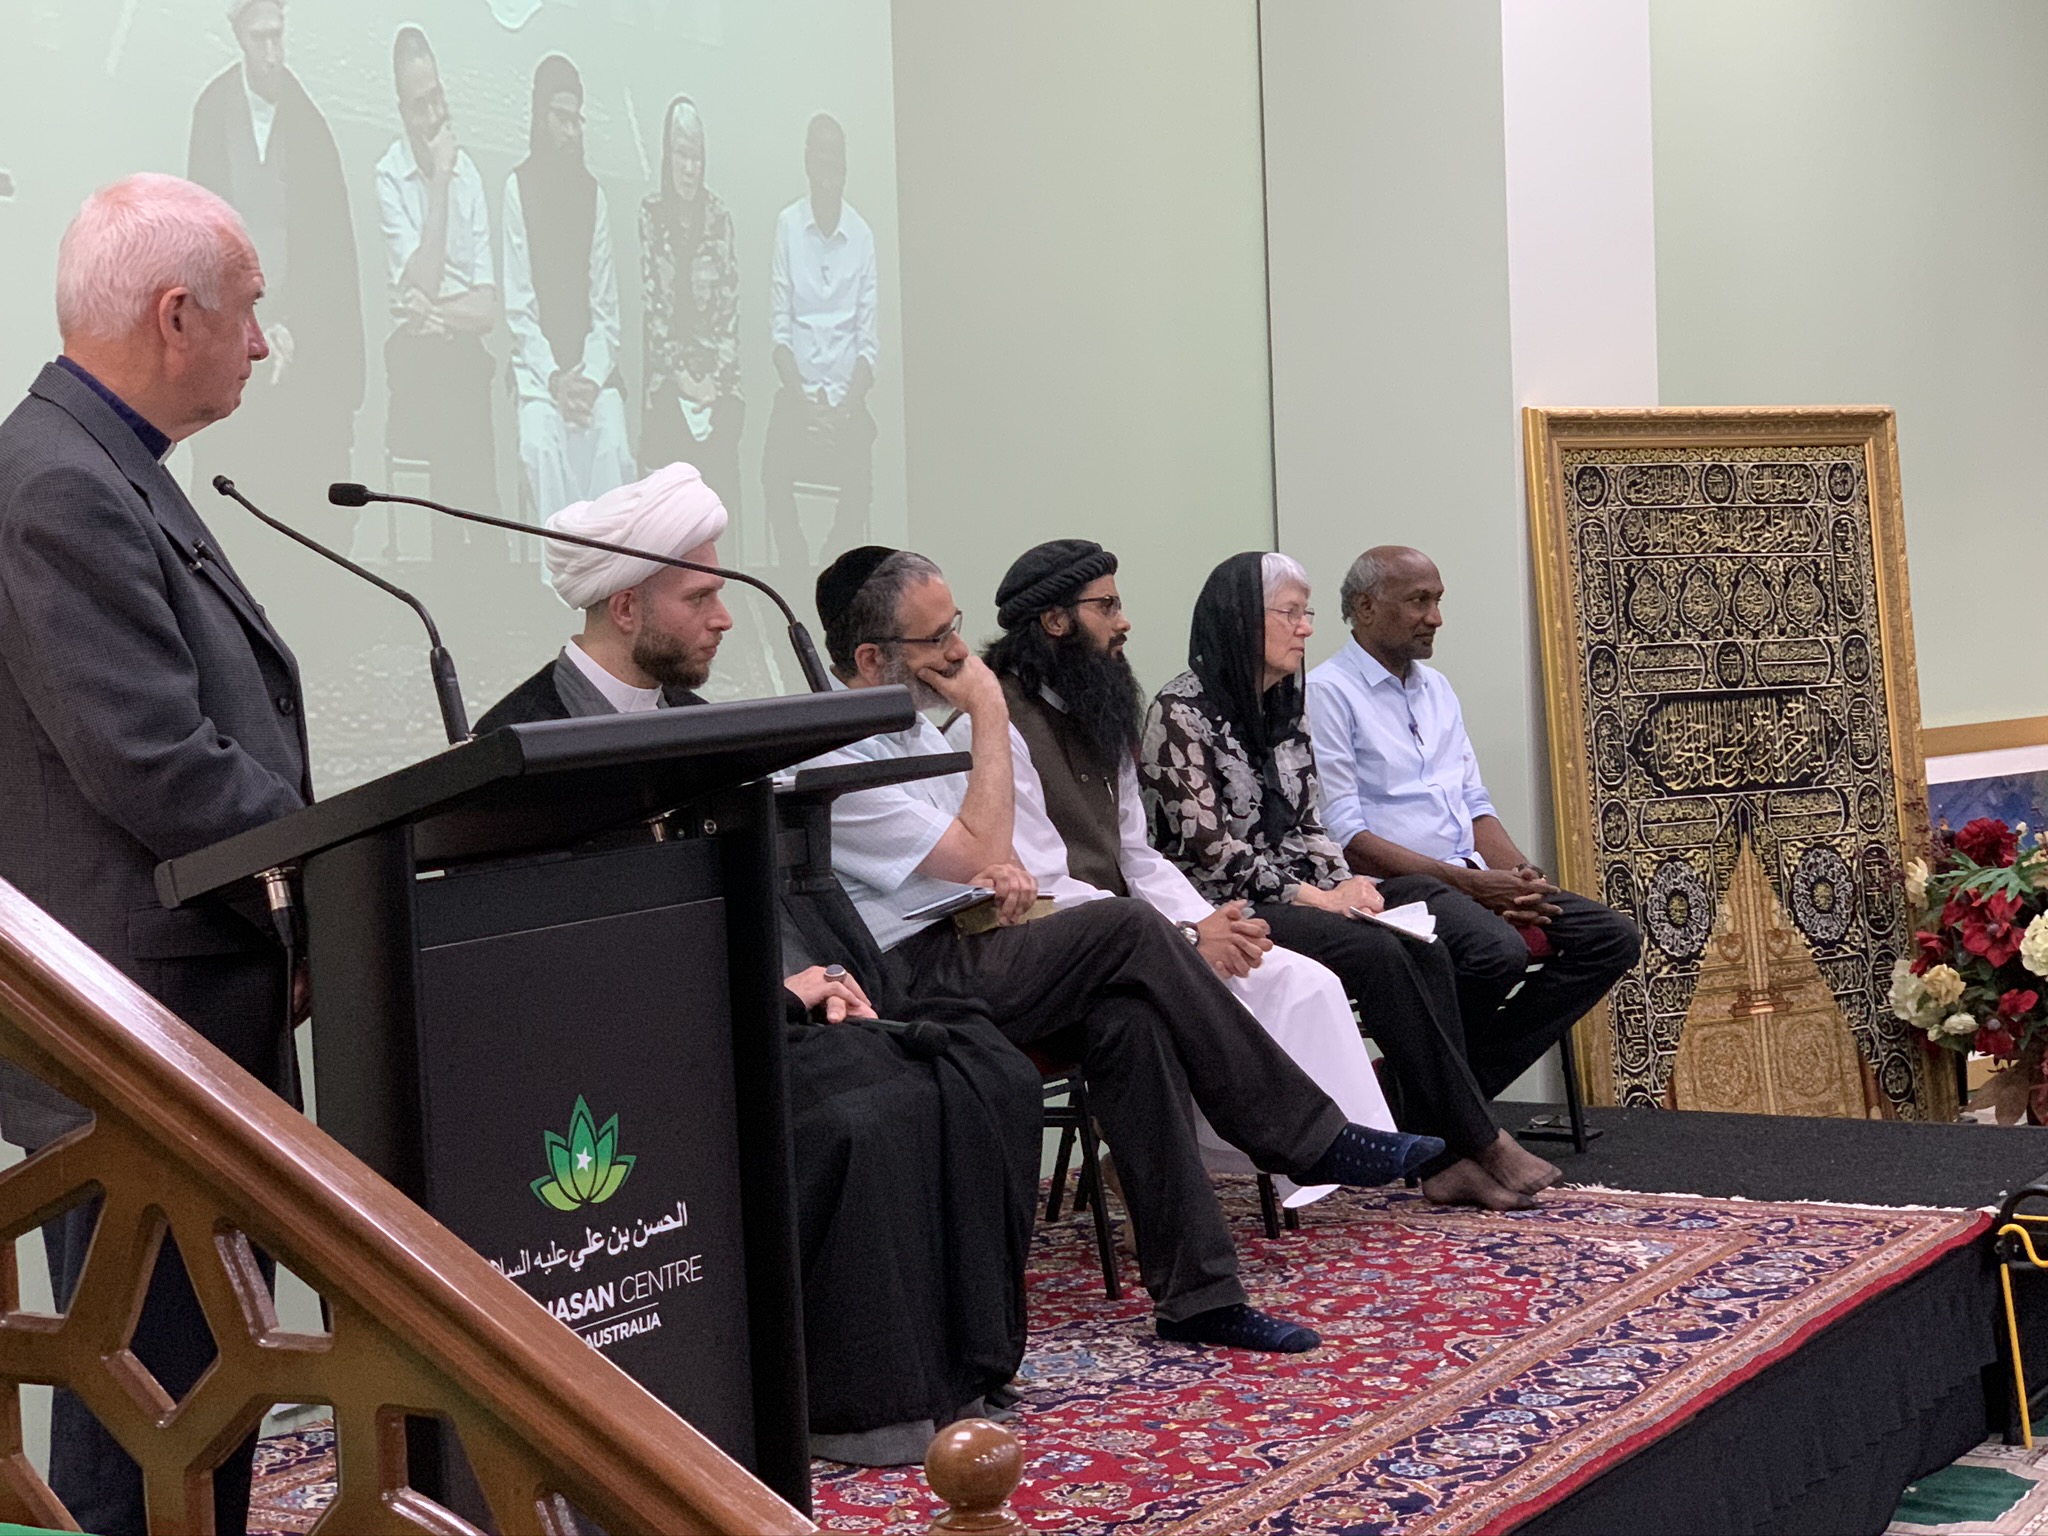 Interfaith – 2019 – Exploring The Humanity Of Moses, Jesus and Muhammad (pbut)